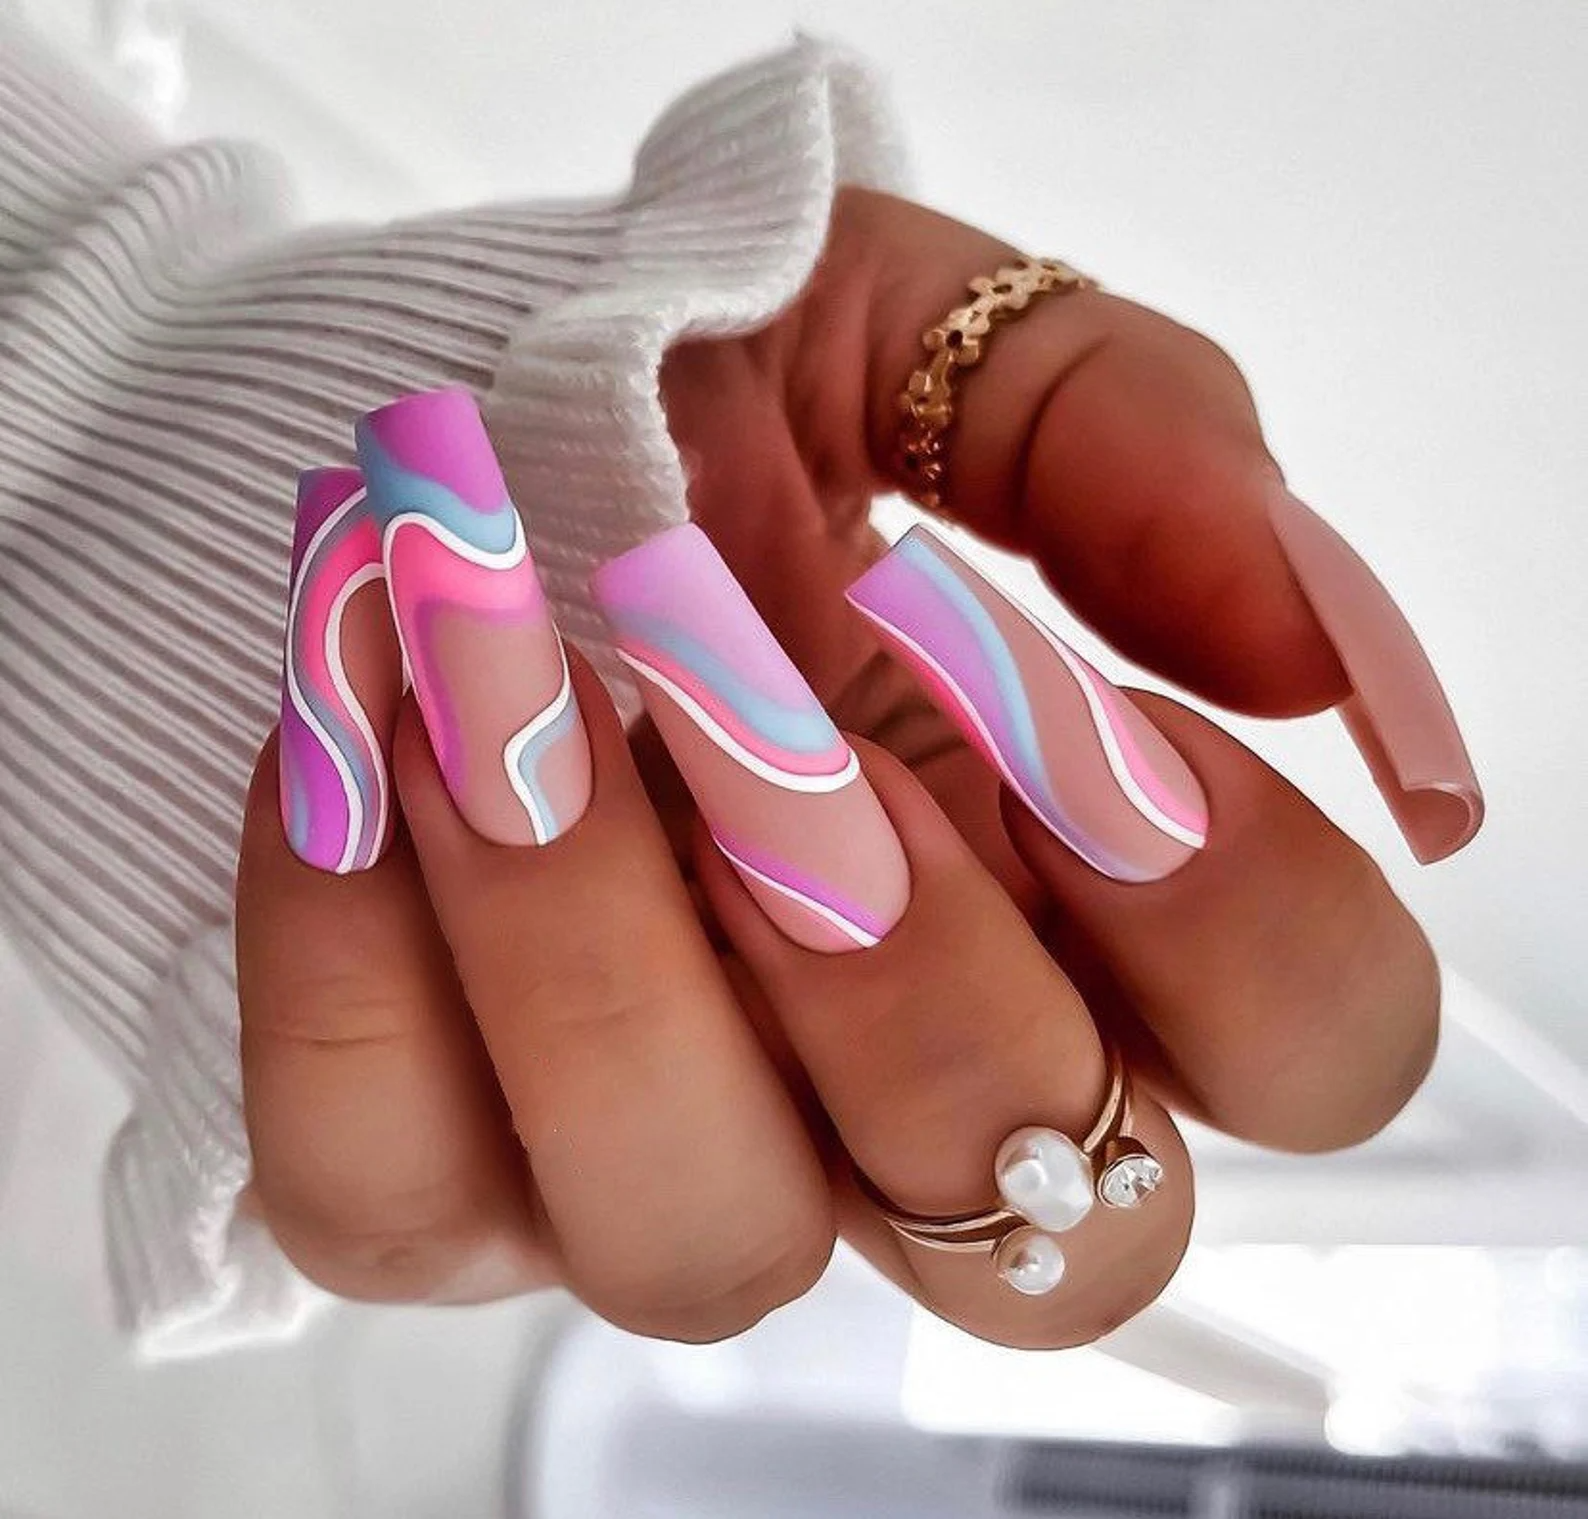 Designer Inspired Nail Stickers-LV - Curves & Sparkle Nail Designs